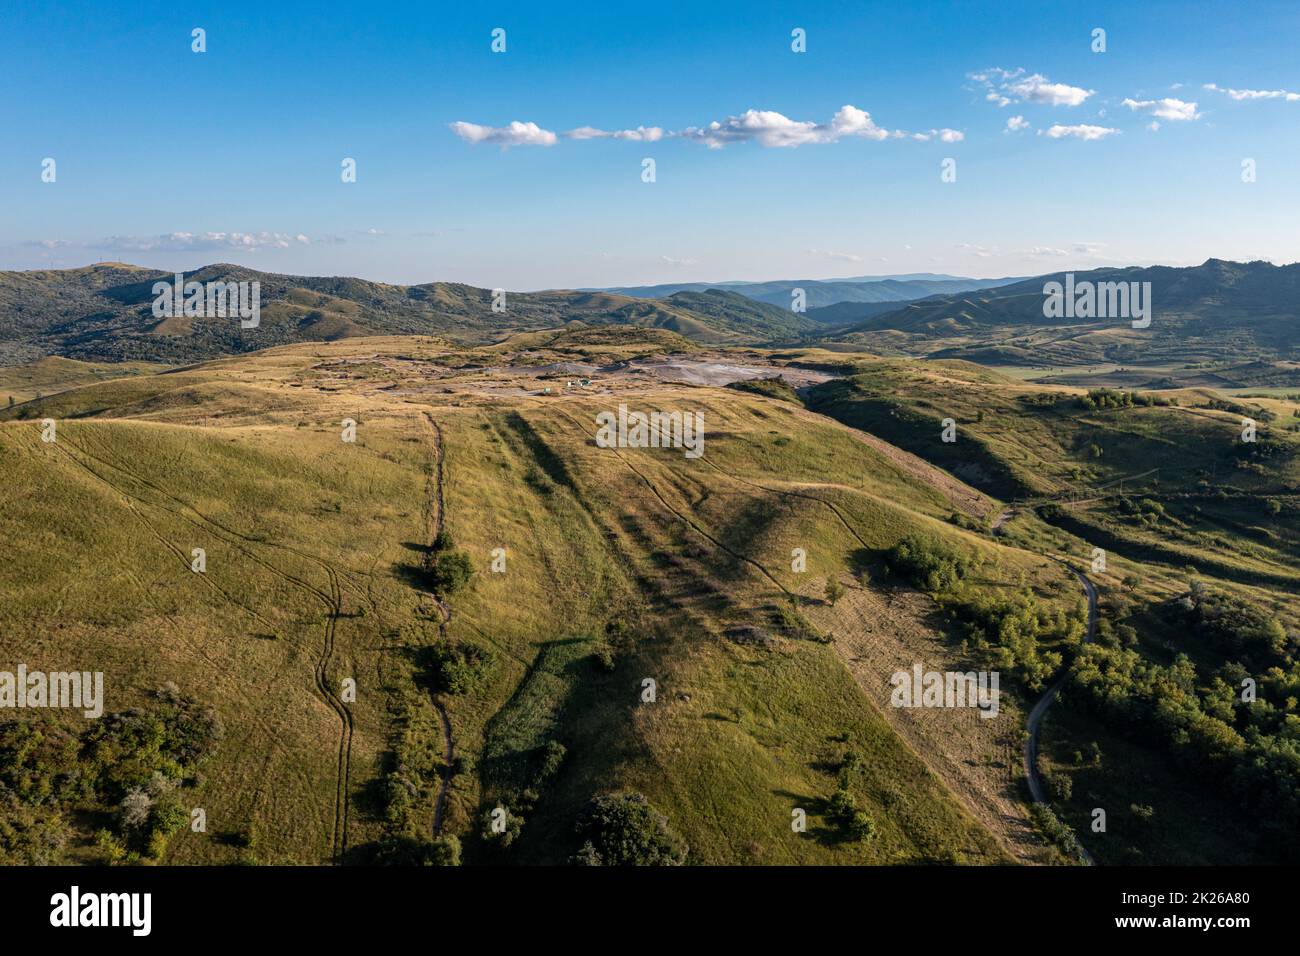 The landscape of the mud volcanoes of Berca in Romania Stock Photo